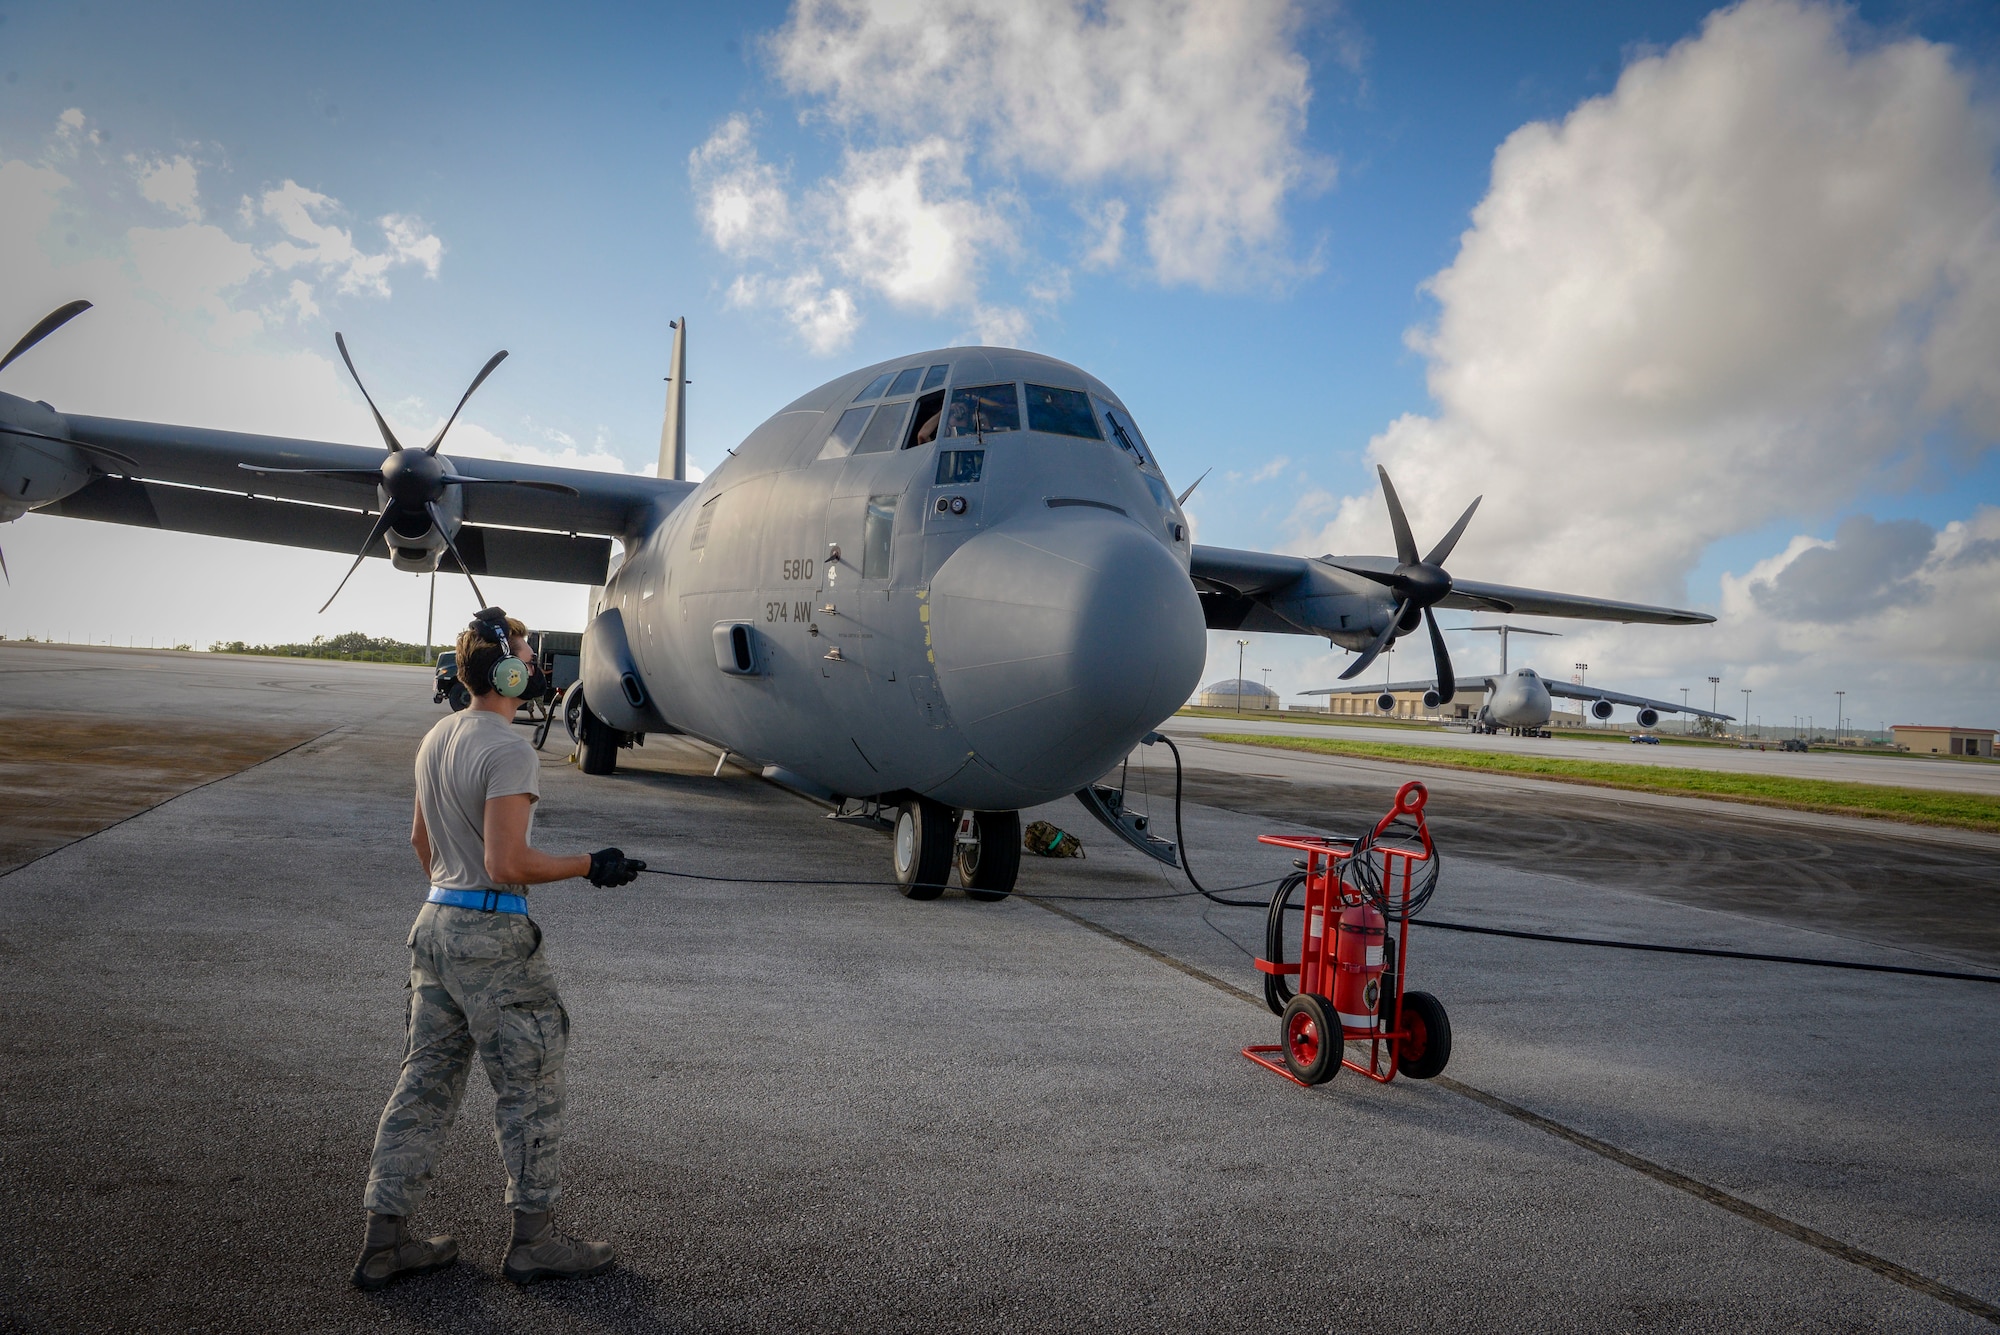 Senior Airman Stephen Yarbrough, 374th Aircraft Maintenance Squadron crew chief from Yokota Air Base, Japan, communicates with the rest of his team aboard a C-130J Super Hercules via radio during the refueling process at Operation Christmas Drop 2020 at Andersen Air Force Base, Guam, Dec. 9.